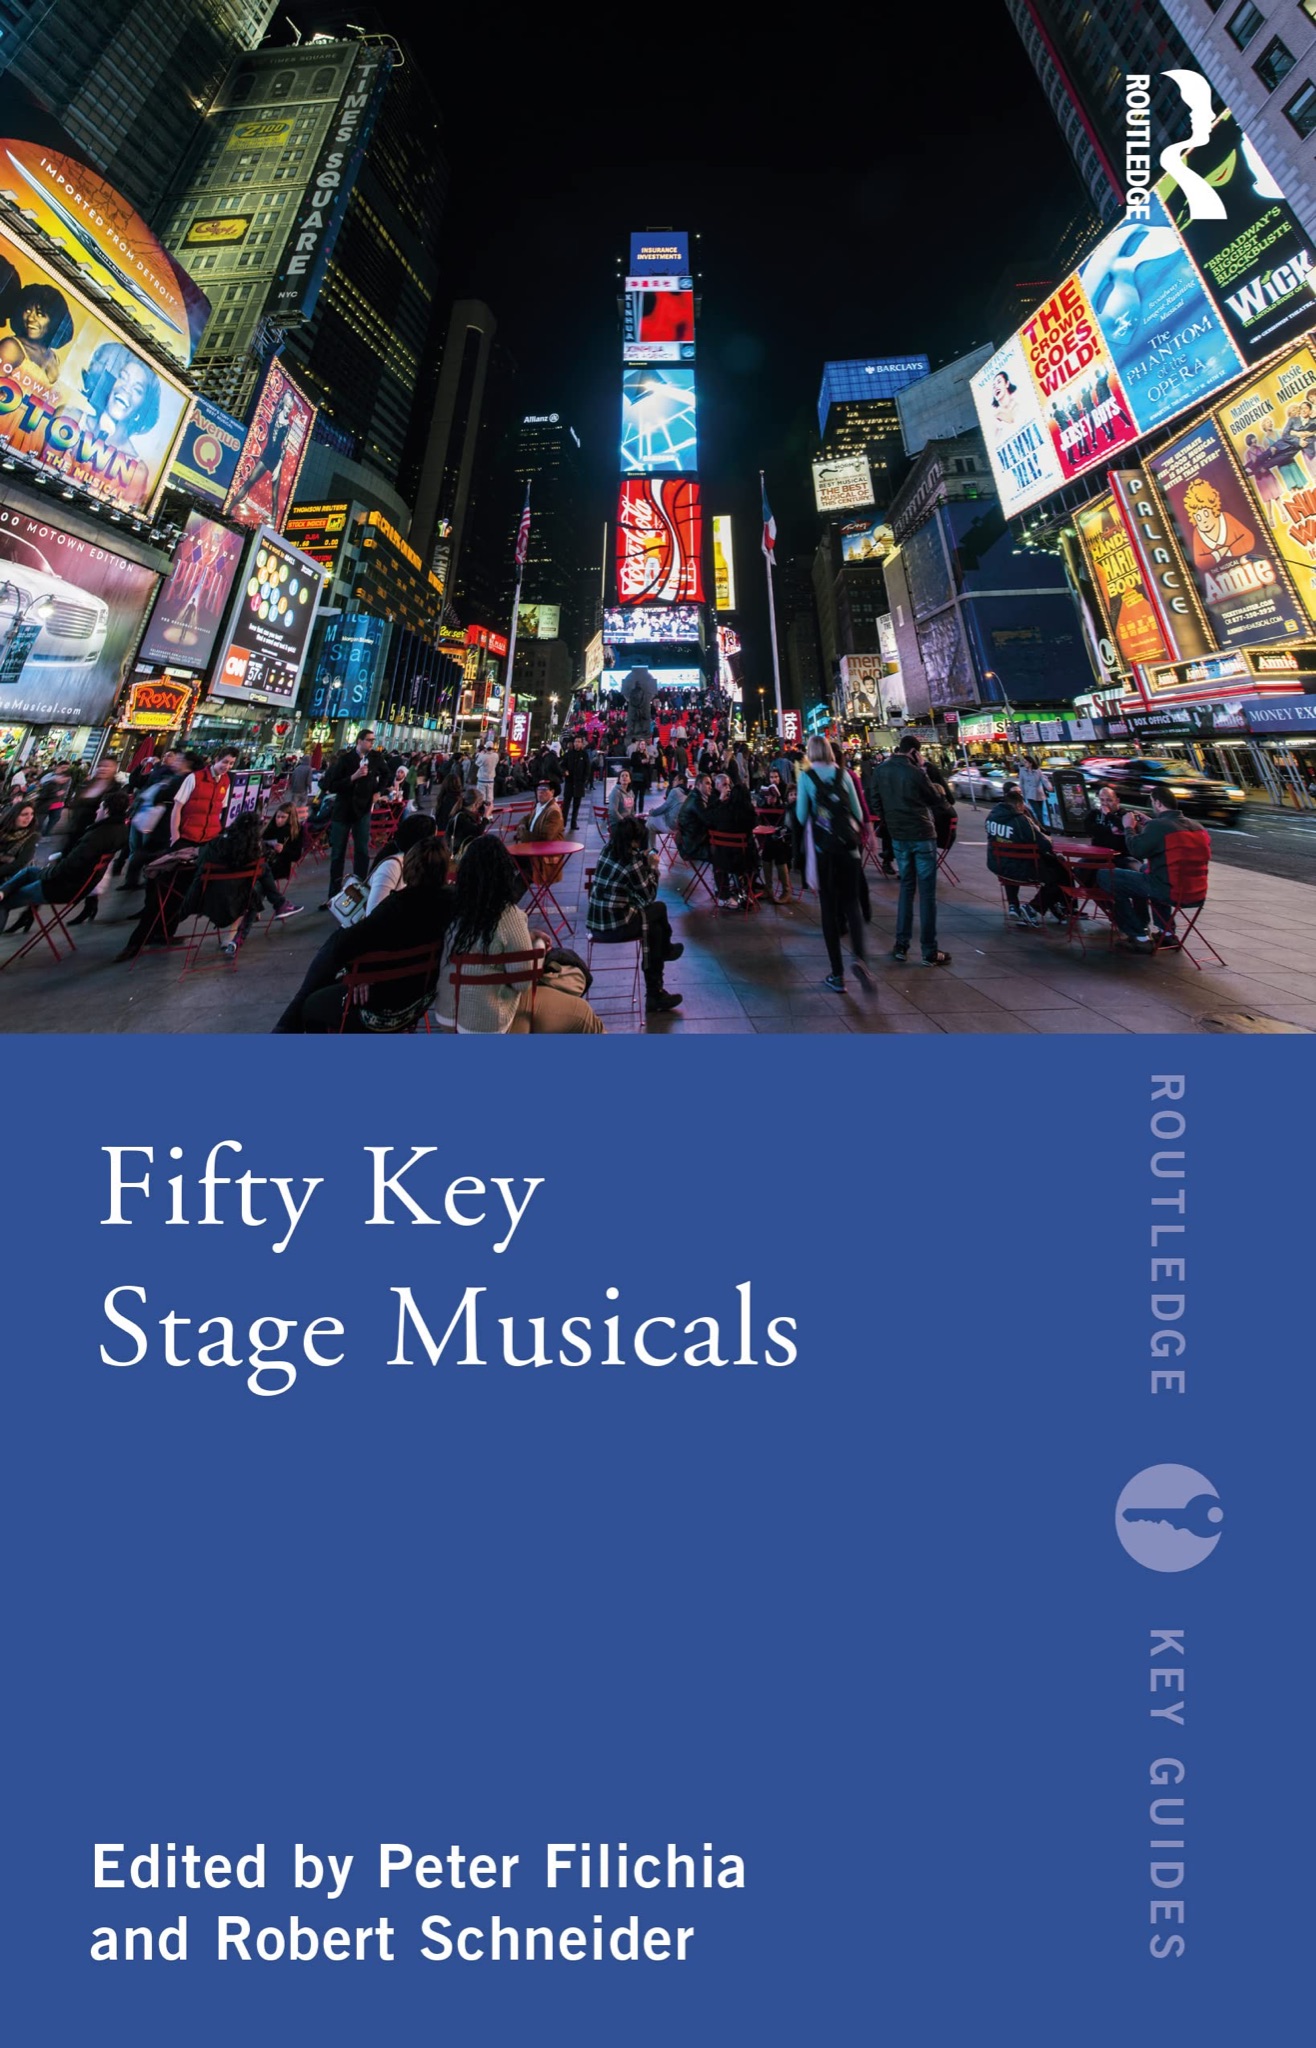 Fifty Key Stage Musicals Theater Pizzazz